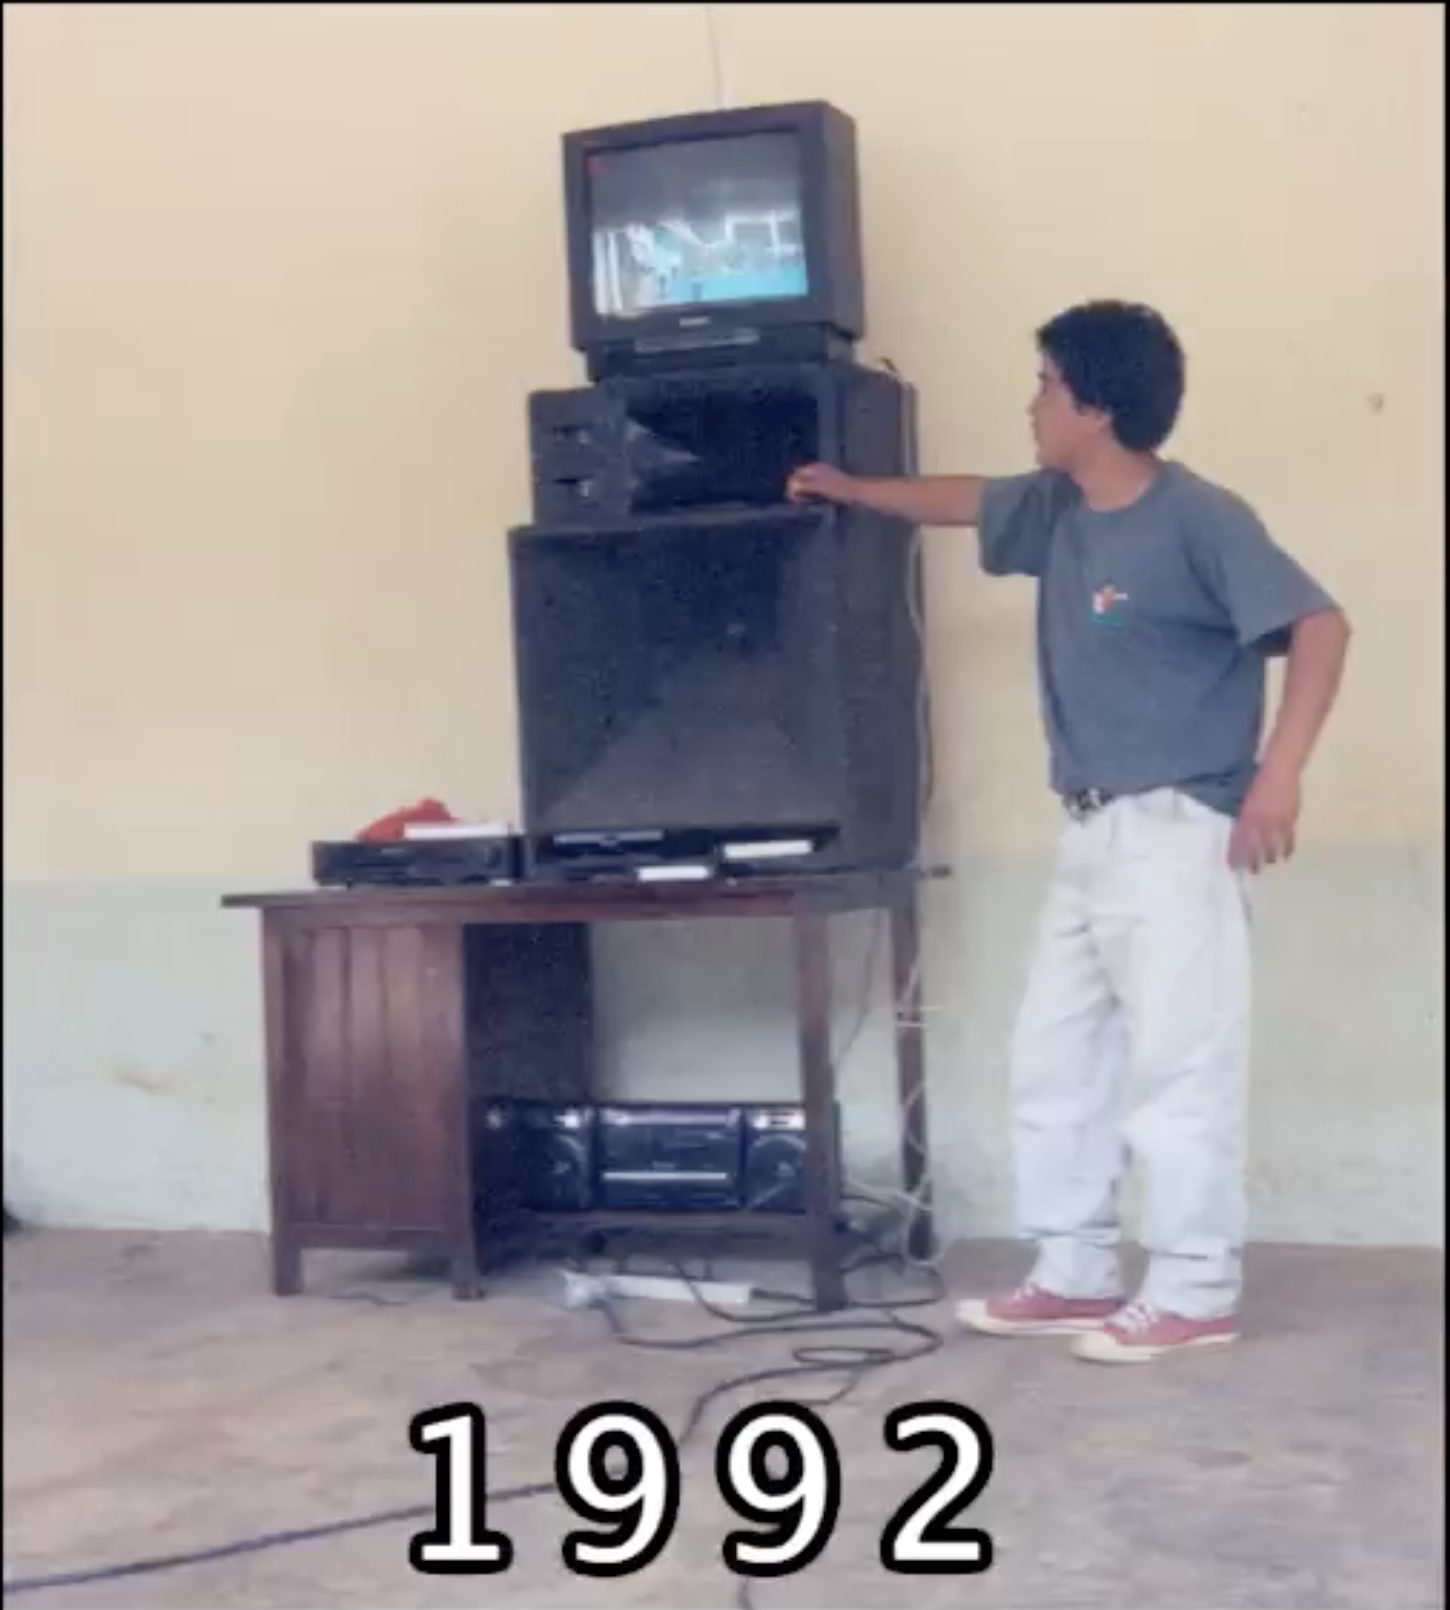 A person with brown skin stands next to a television, which sits on a media tower. At the bottom of the photo is the date, "1992".